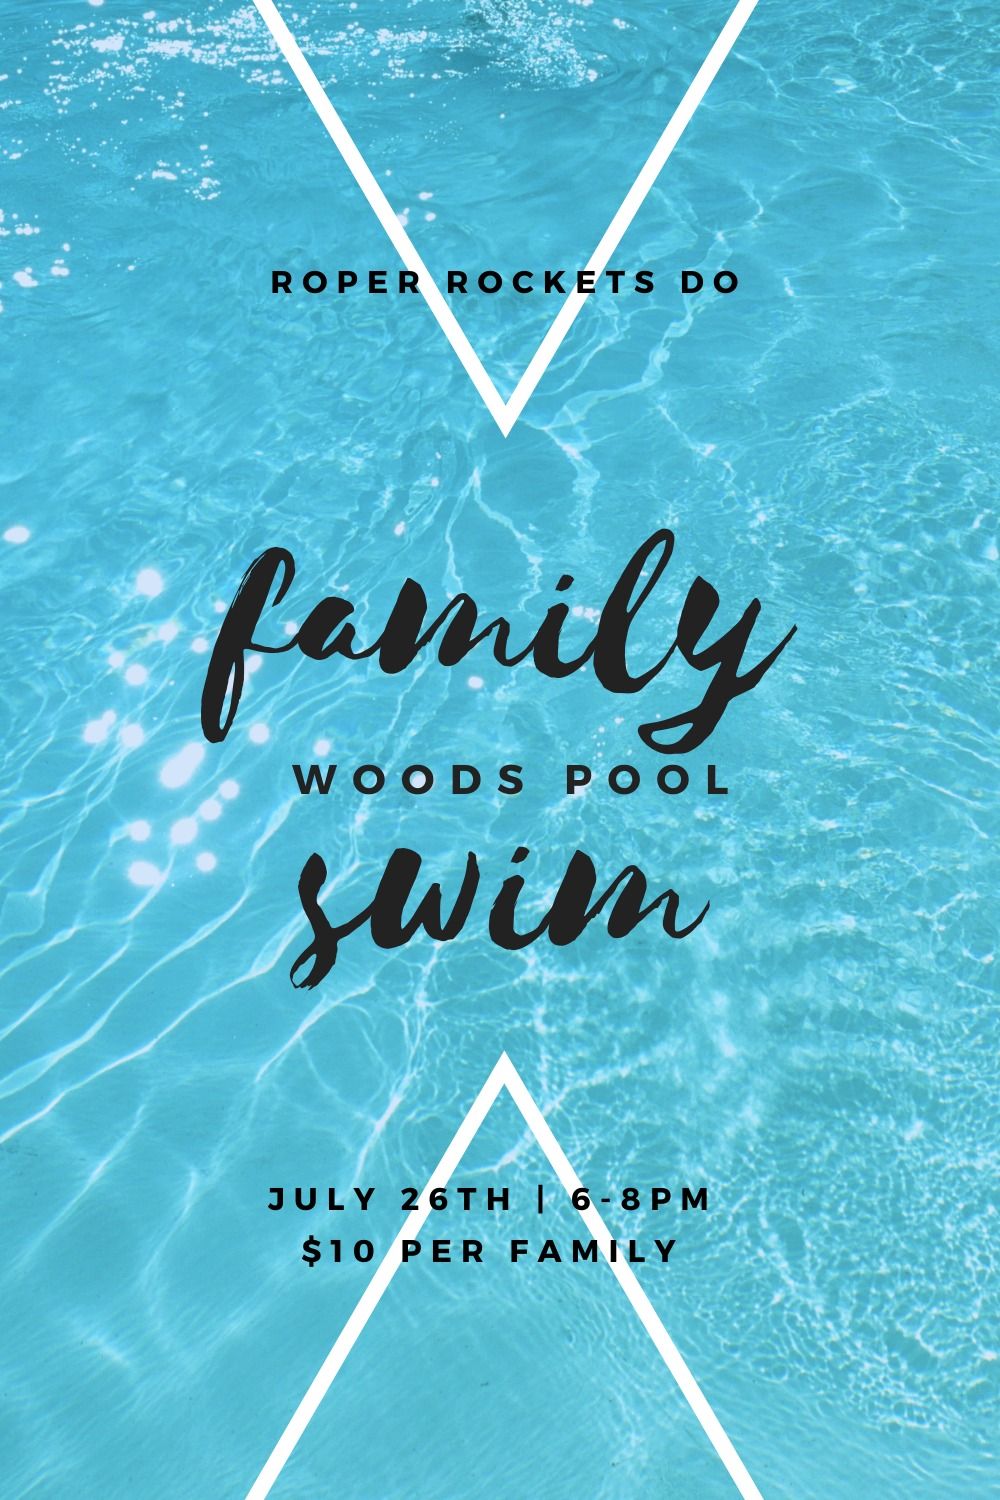 Roper Rockets at Woods Pool (Family Night)